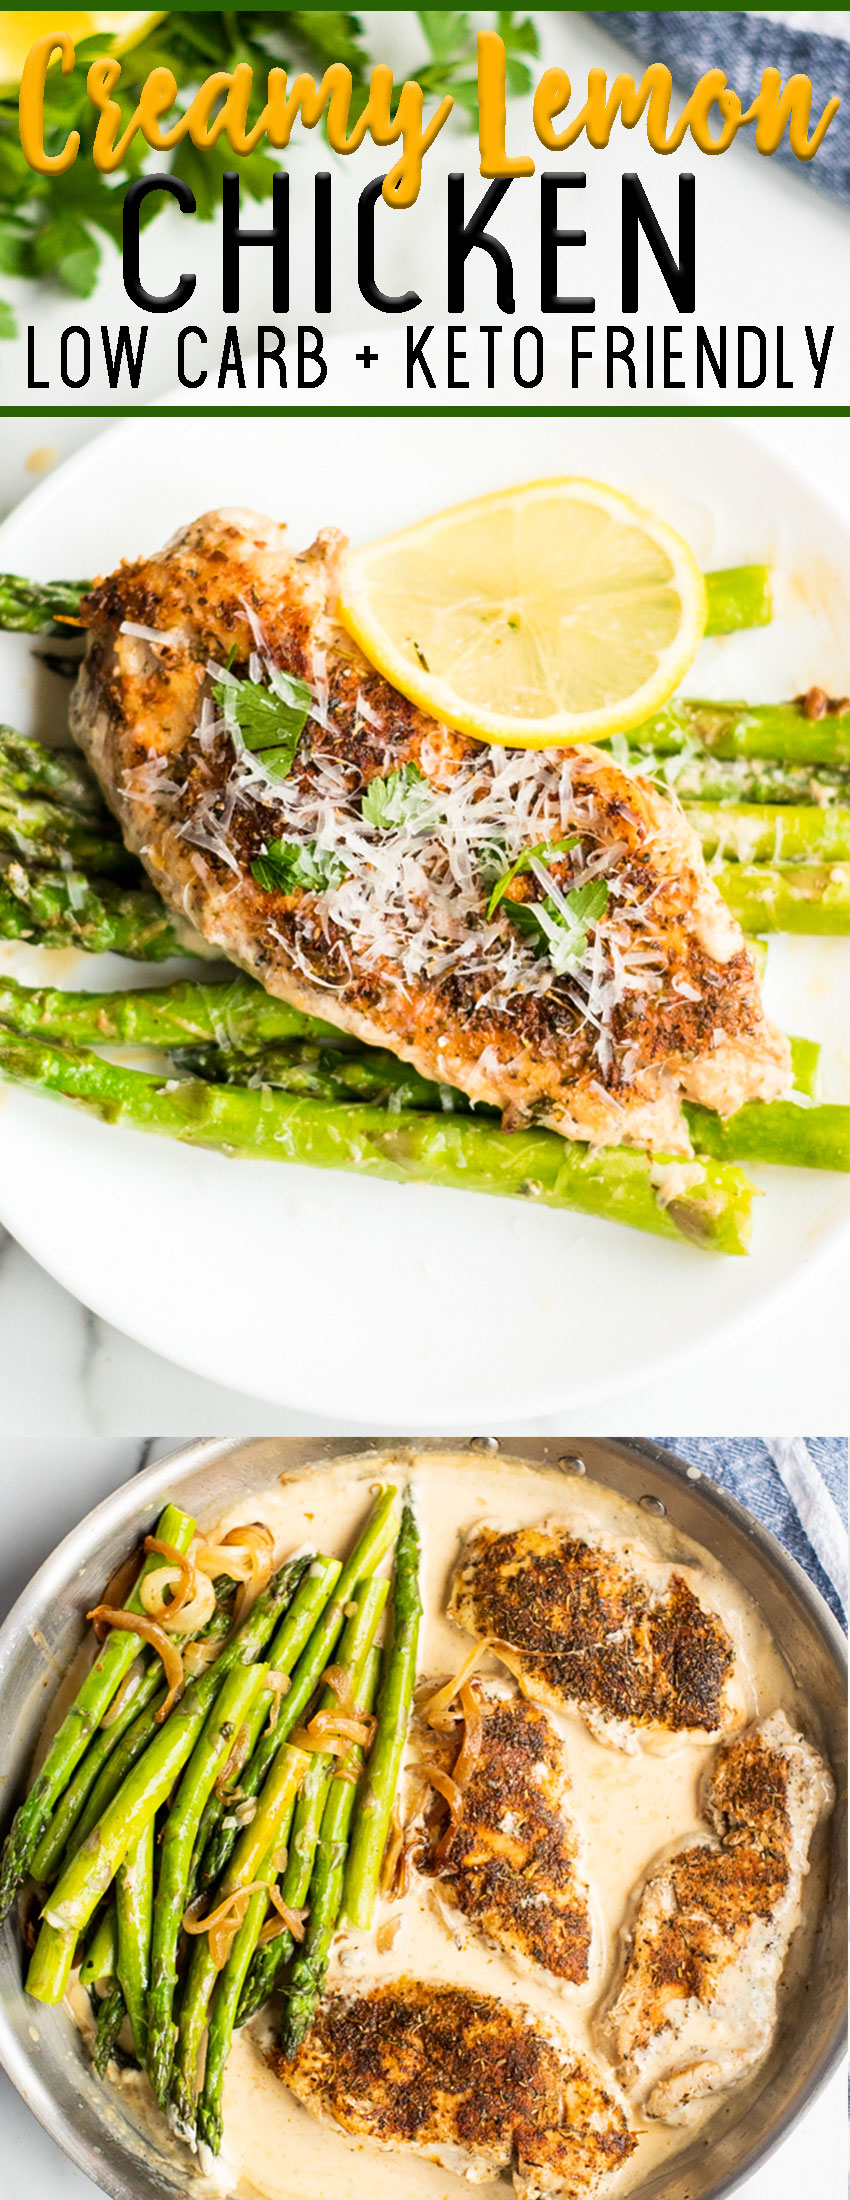 This low carb, keto friendly creamy lemon chicken with asparagus is soooo delicious. 